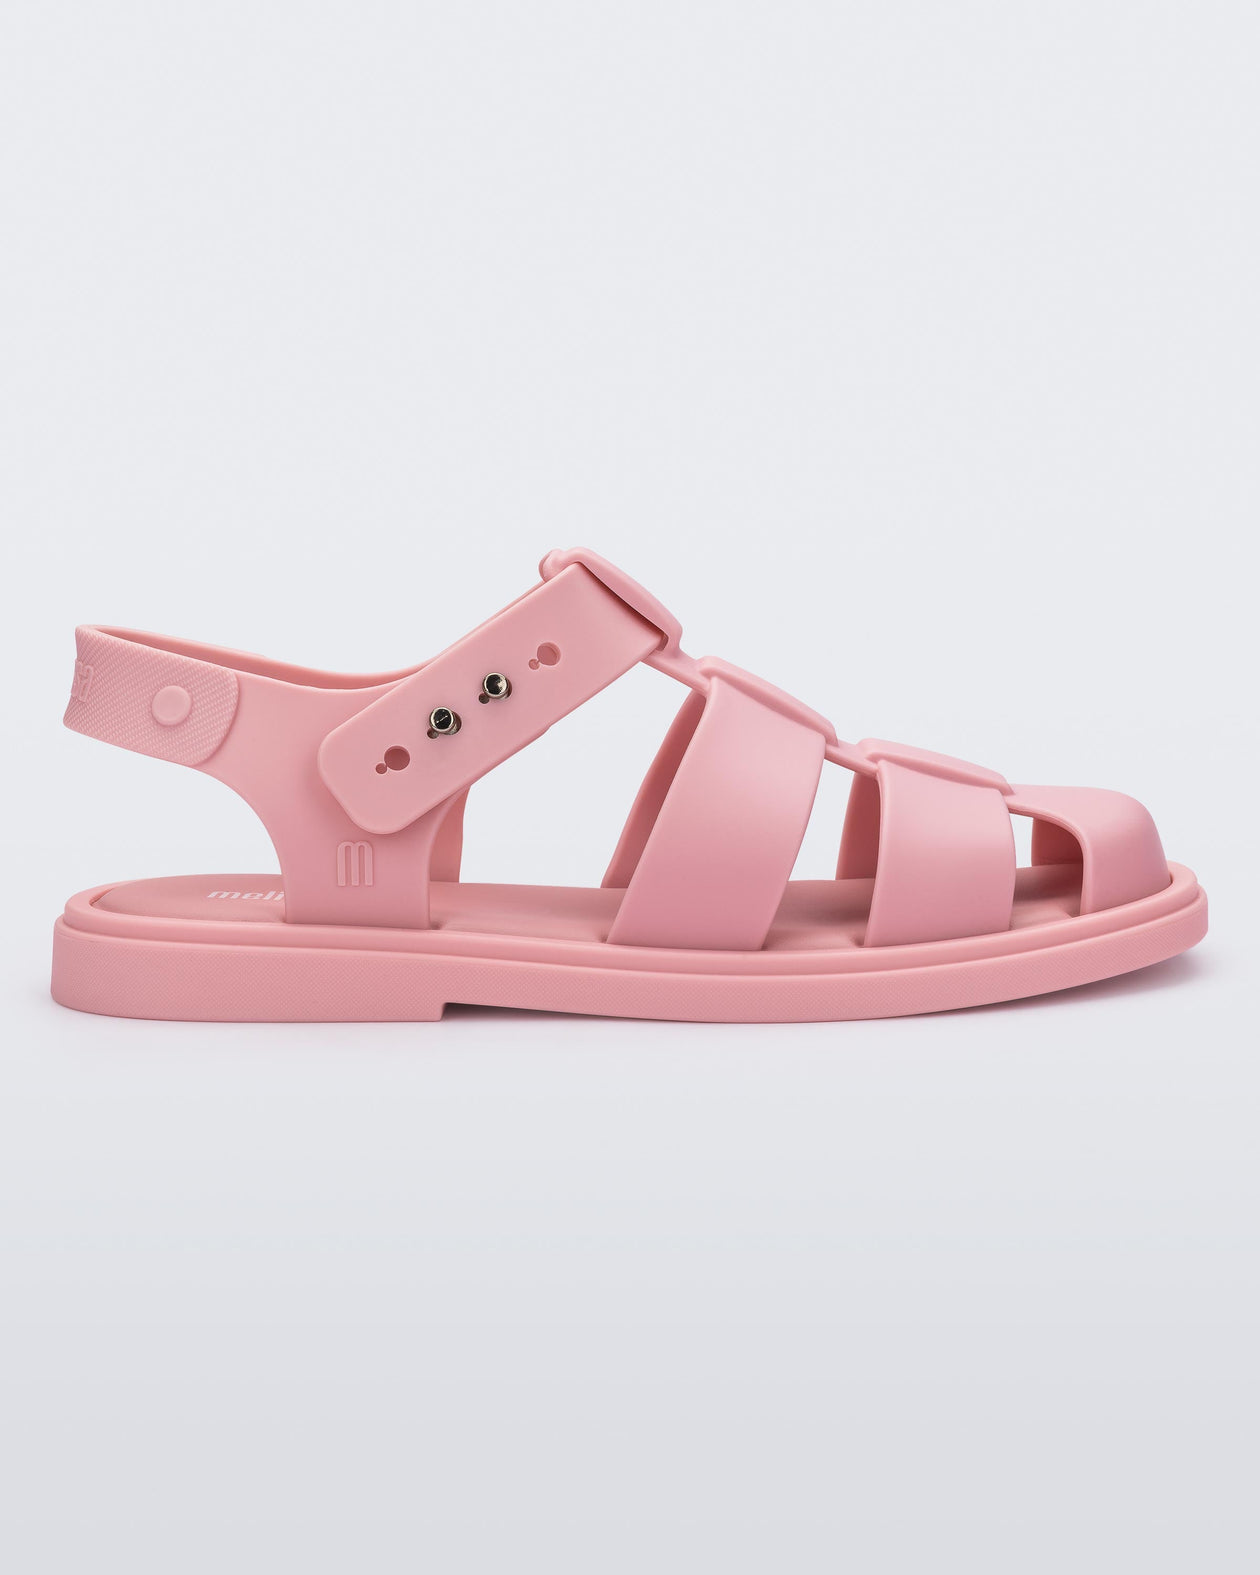 Side view of a pink Emma women's sandal.